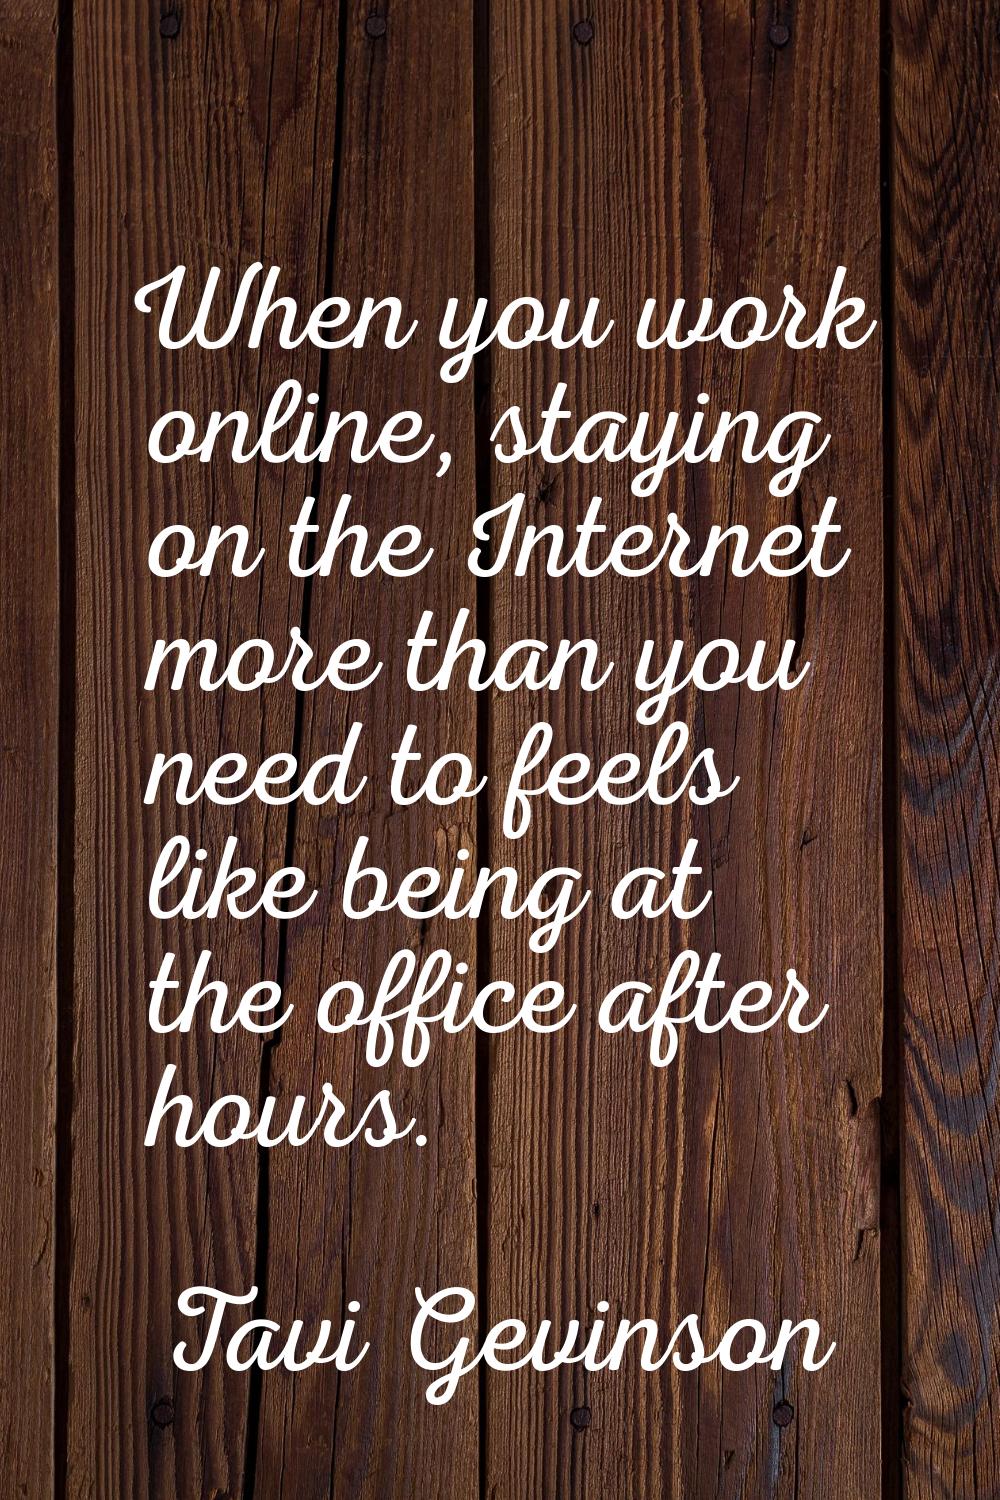 When you work online, staying on the Internet more than you need to feels like being at the office 